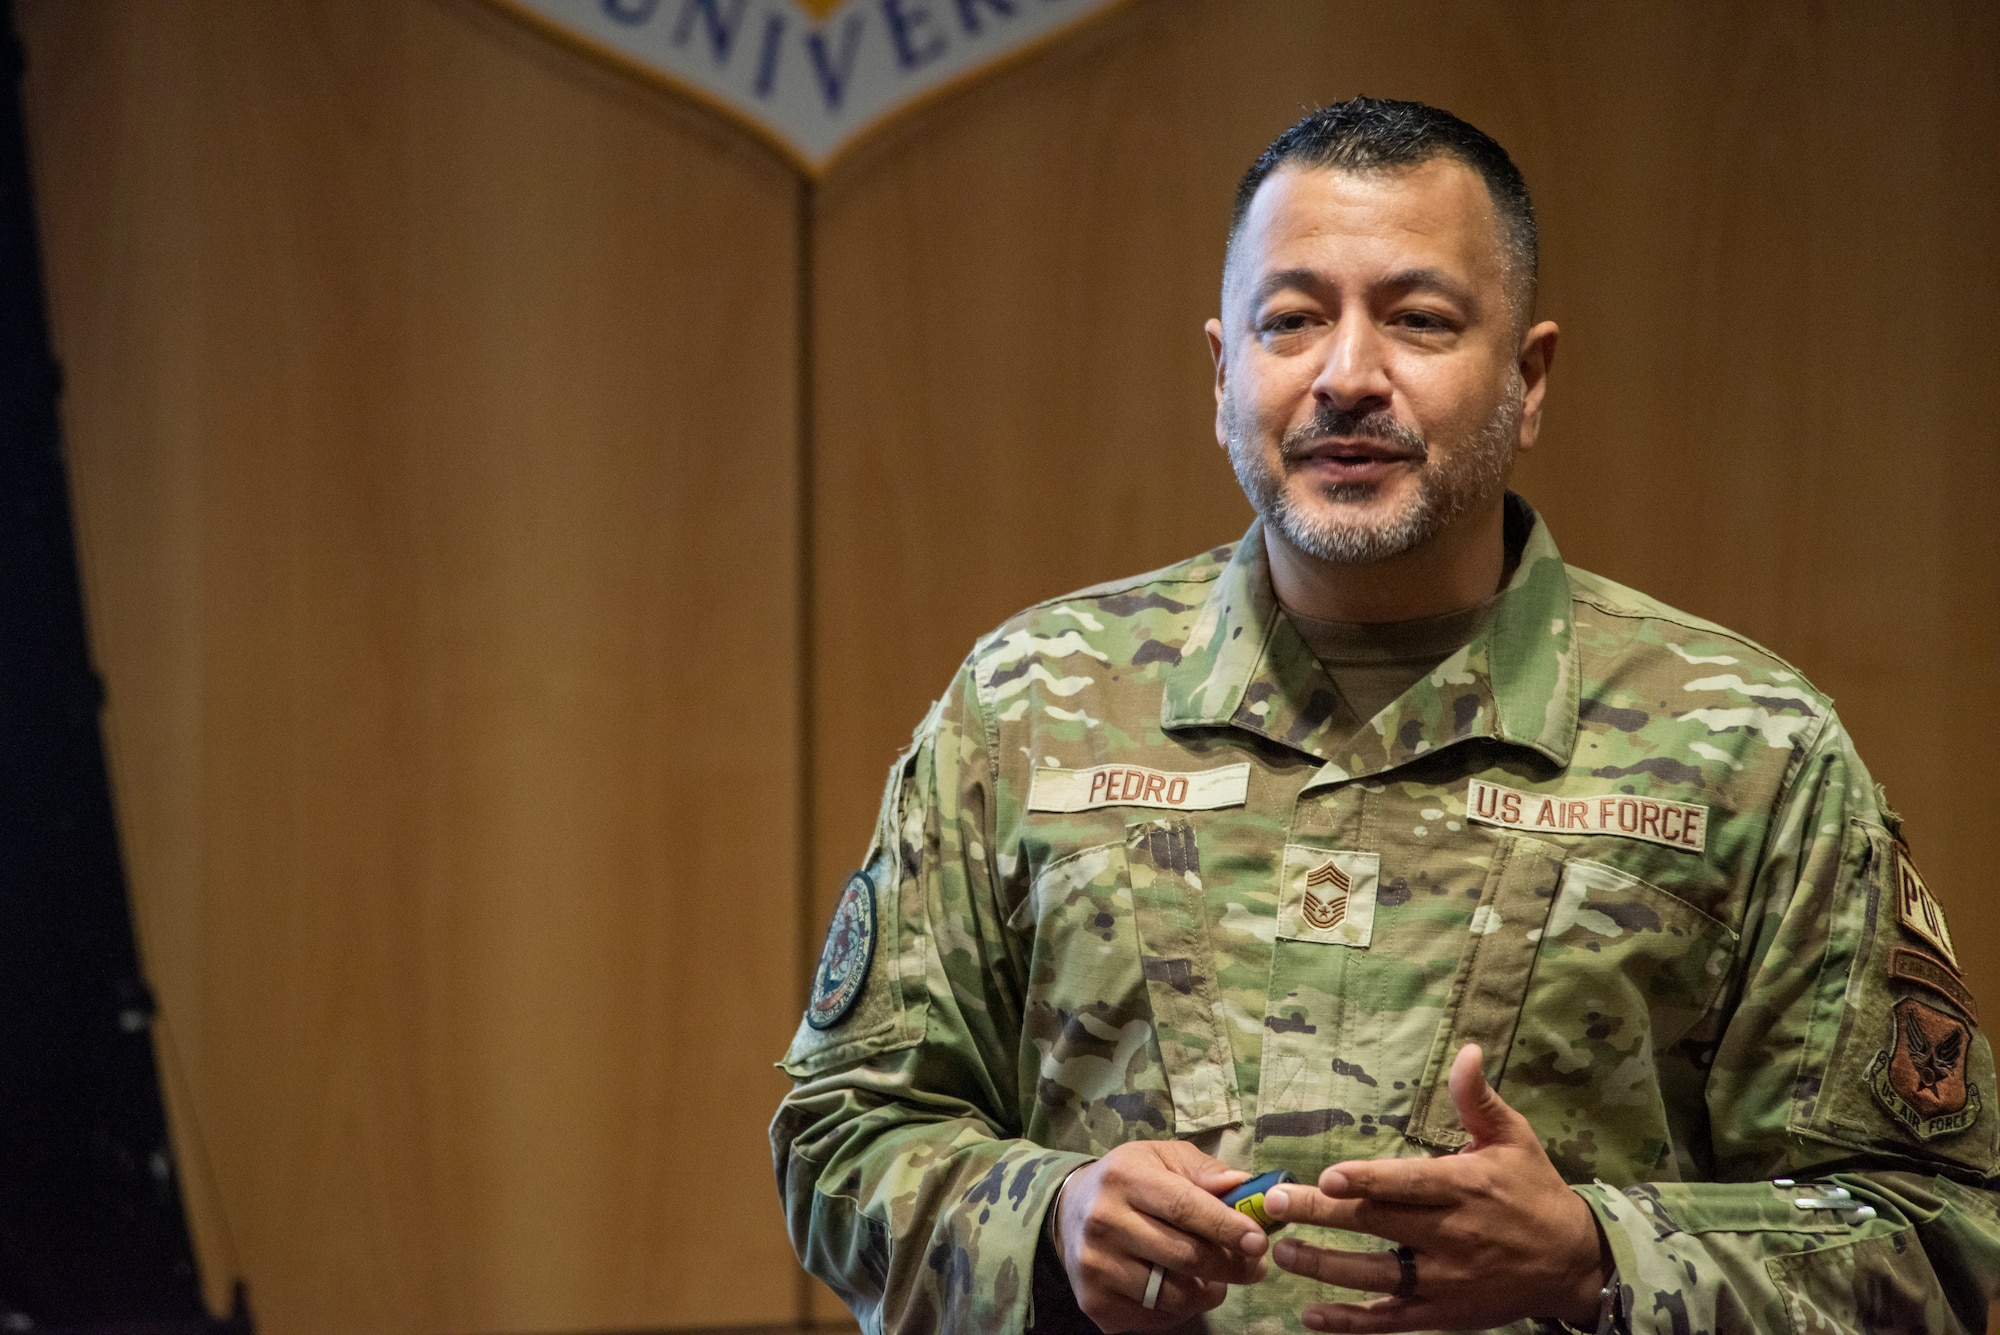 U.S. Air Force Chief Master Sgt. Donald Pedro, Senior Enlisted Leader to the Secretary of the Air Force, Office of Diversity and Inclusion, briefs Airmen and officers during an enlisted force development panel at Joint Base Elmendorf-Richarson, Alaska, March 30, 2023.